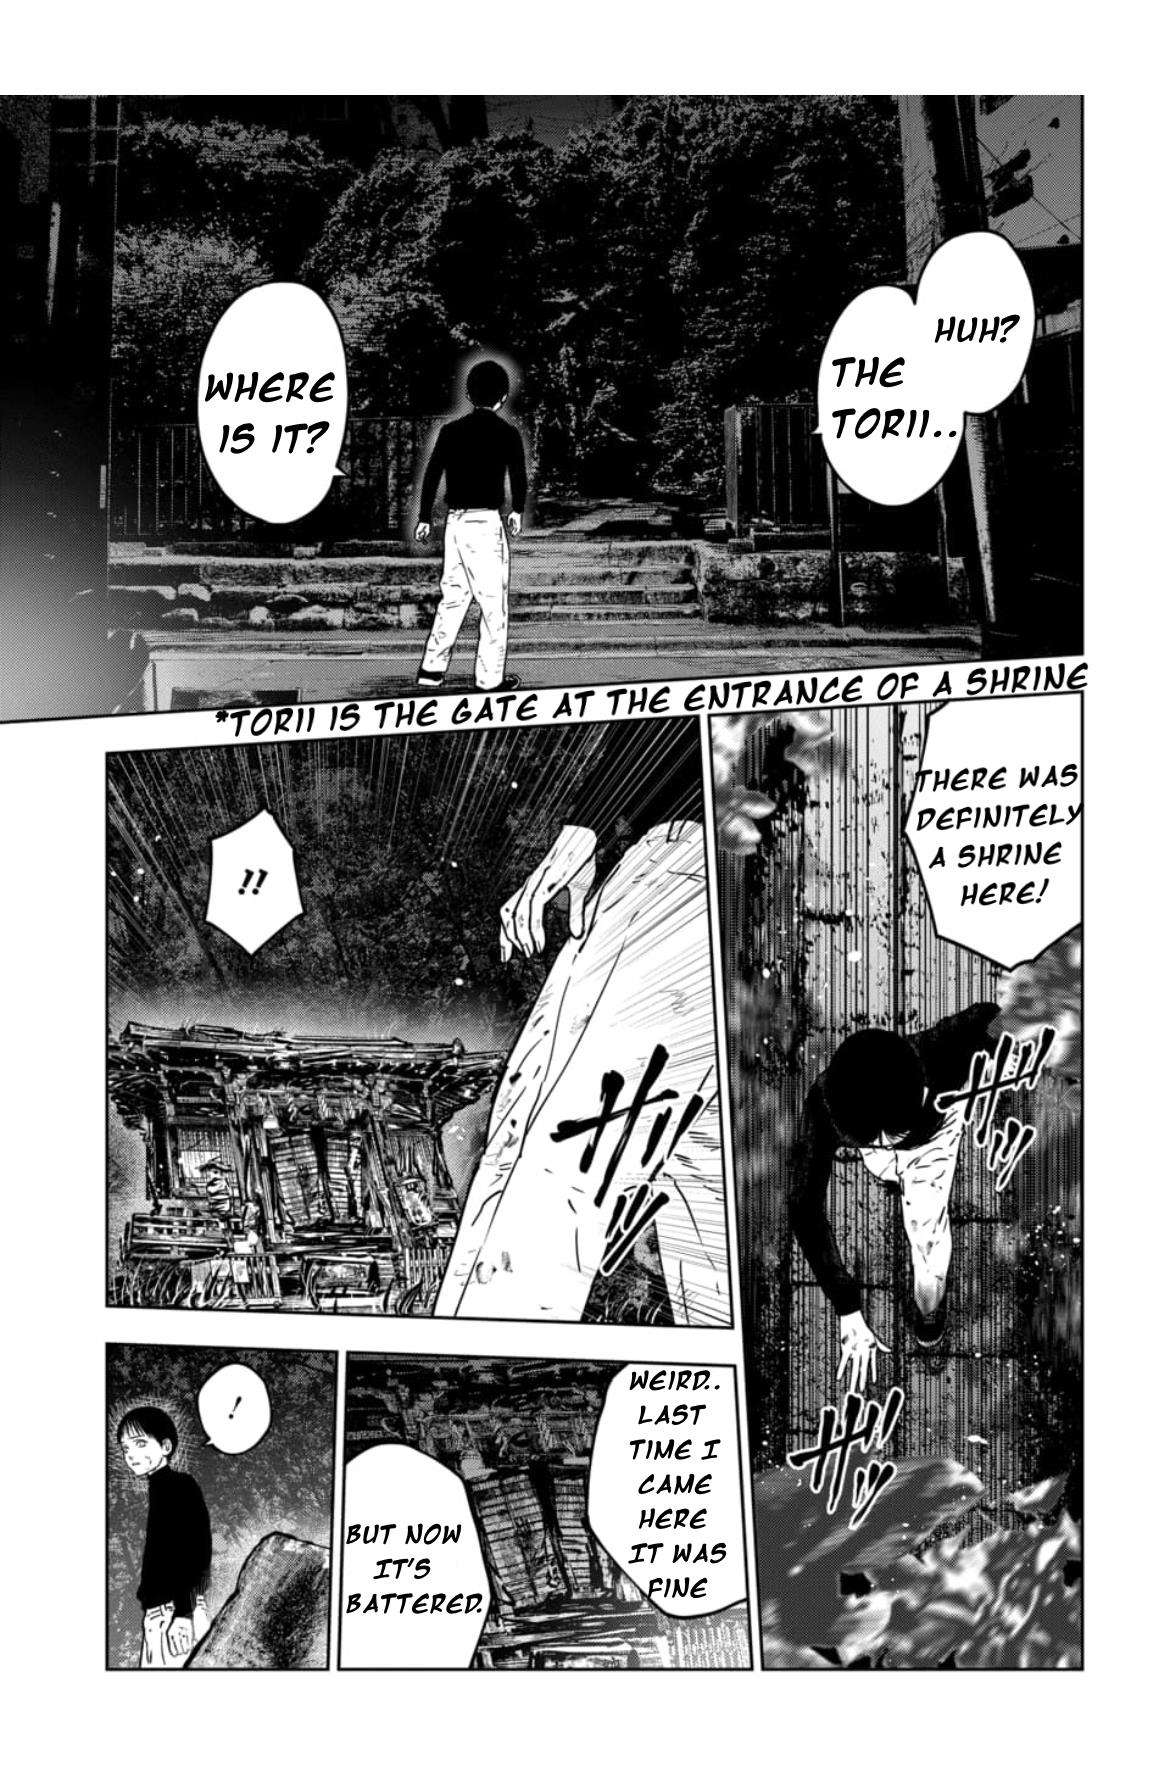 Massacre Happy Ending - Chapter Of Blue - Vol.1 Chapter 4.1: Chapter 4 Page 4 Missing Page - Picture 1